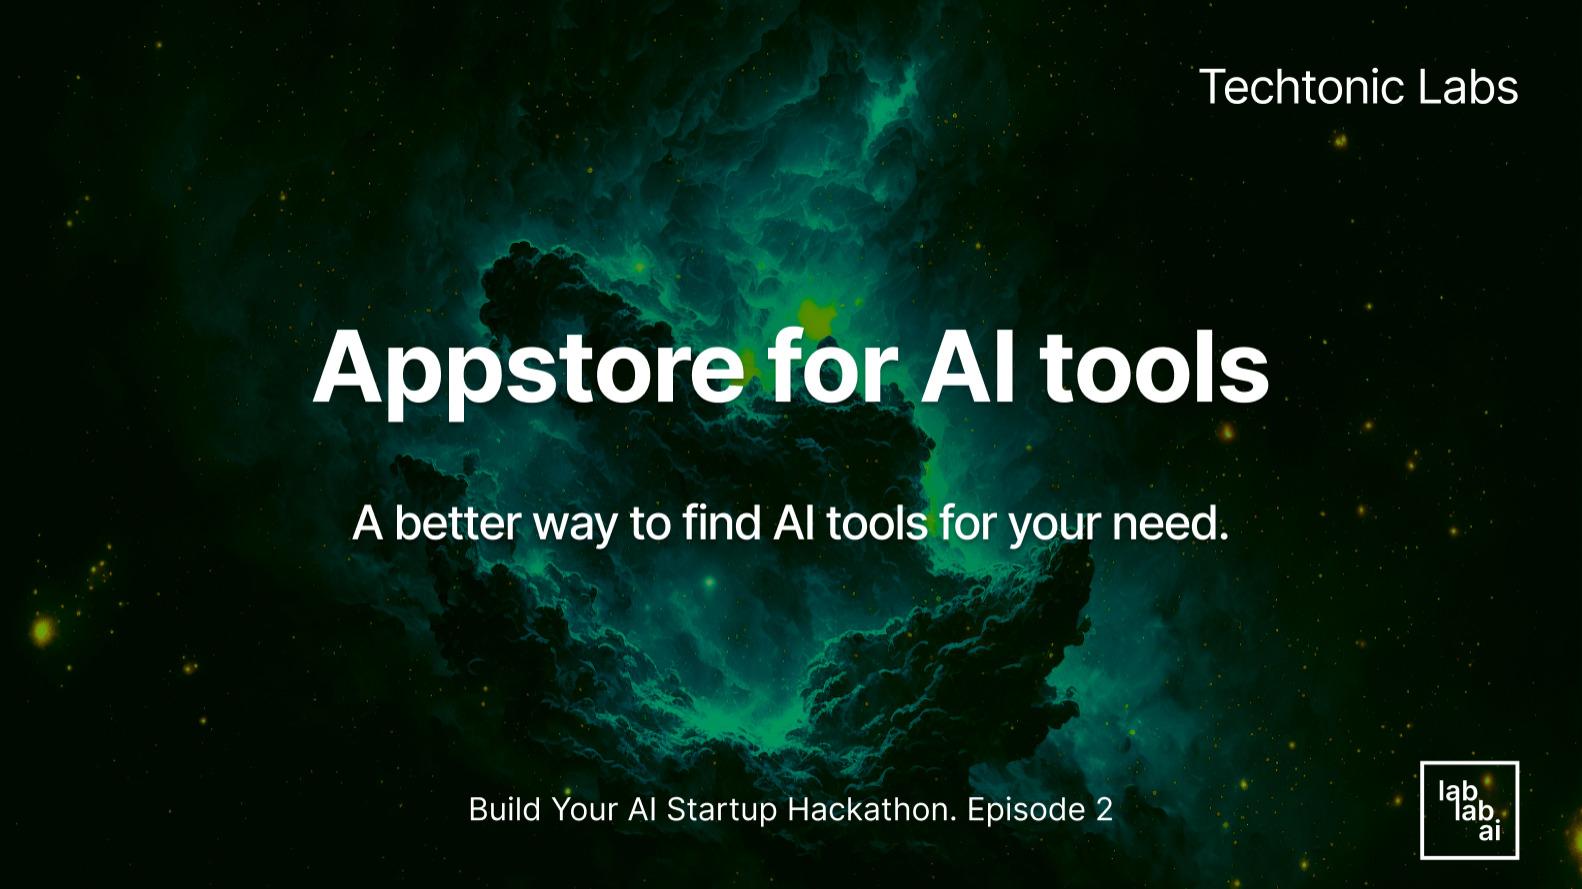 Appstore for AI tools